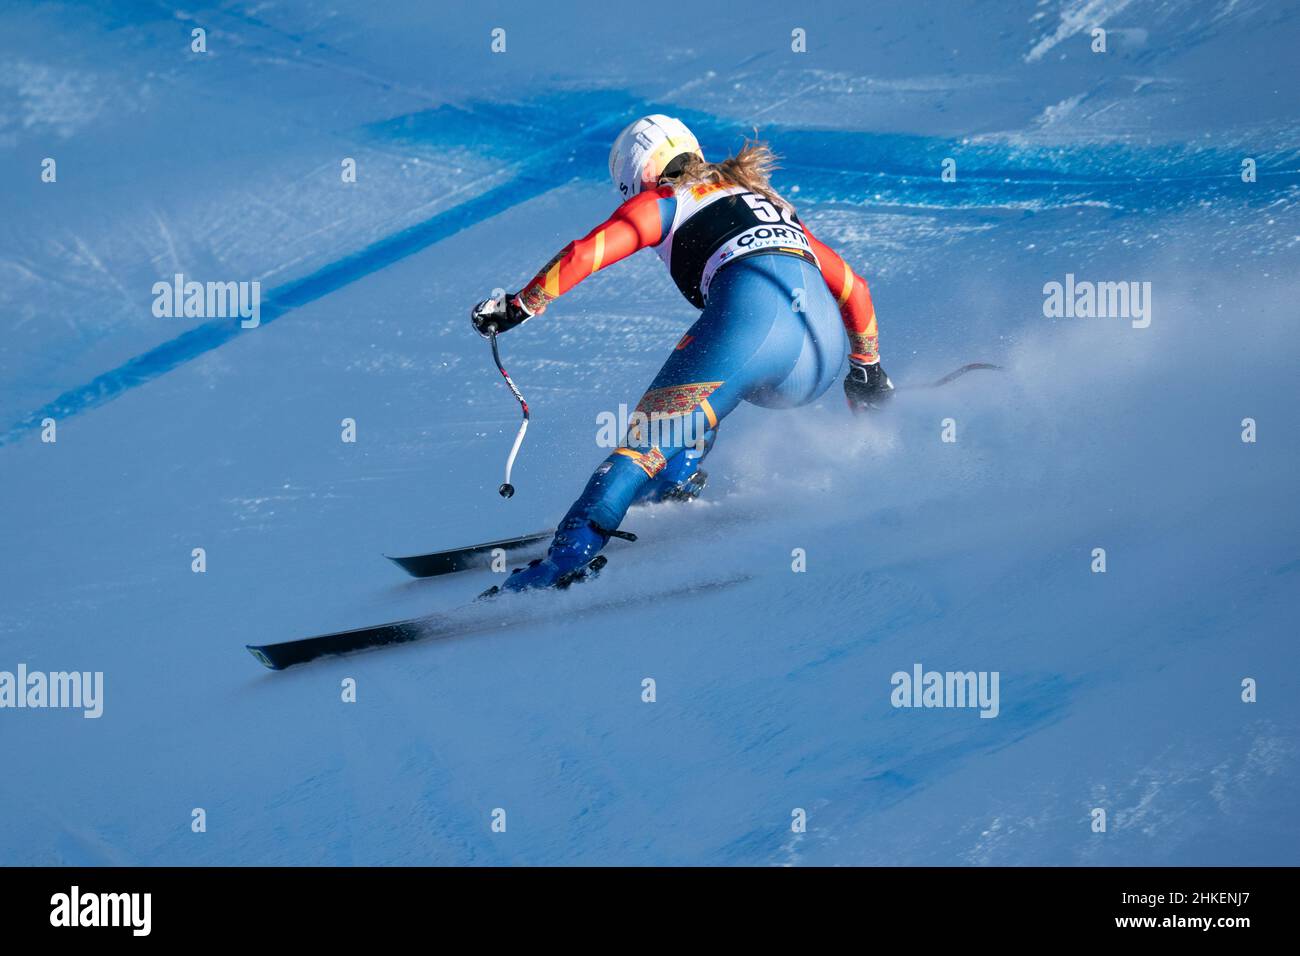 Cortina d'Ampezzo, Italy. 23 January 2022. CAILL Ania Monica (ROU) competing in the Fis Alpine Ski World Cup Women's Super-G on the Olympia delle Tofa Stock Photo